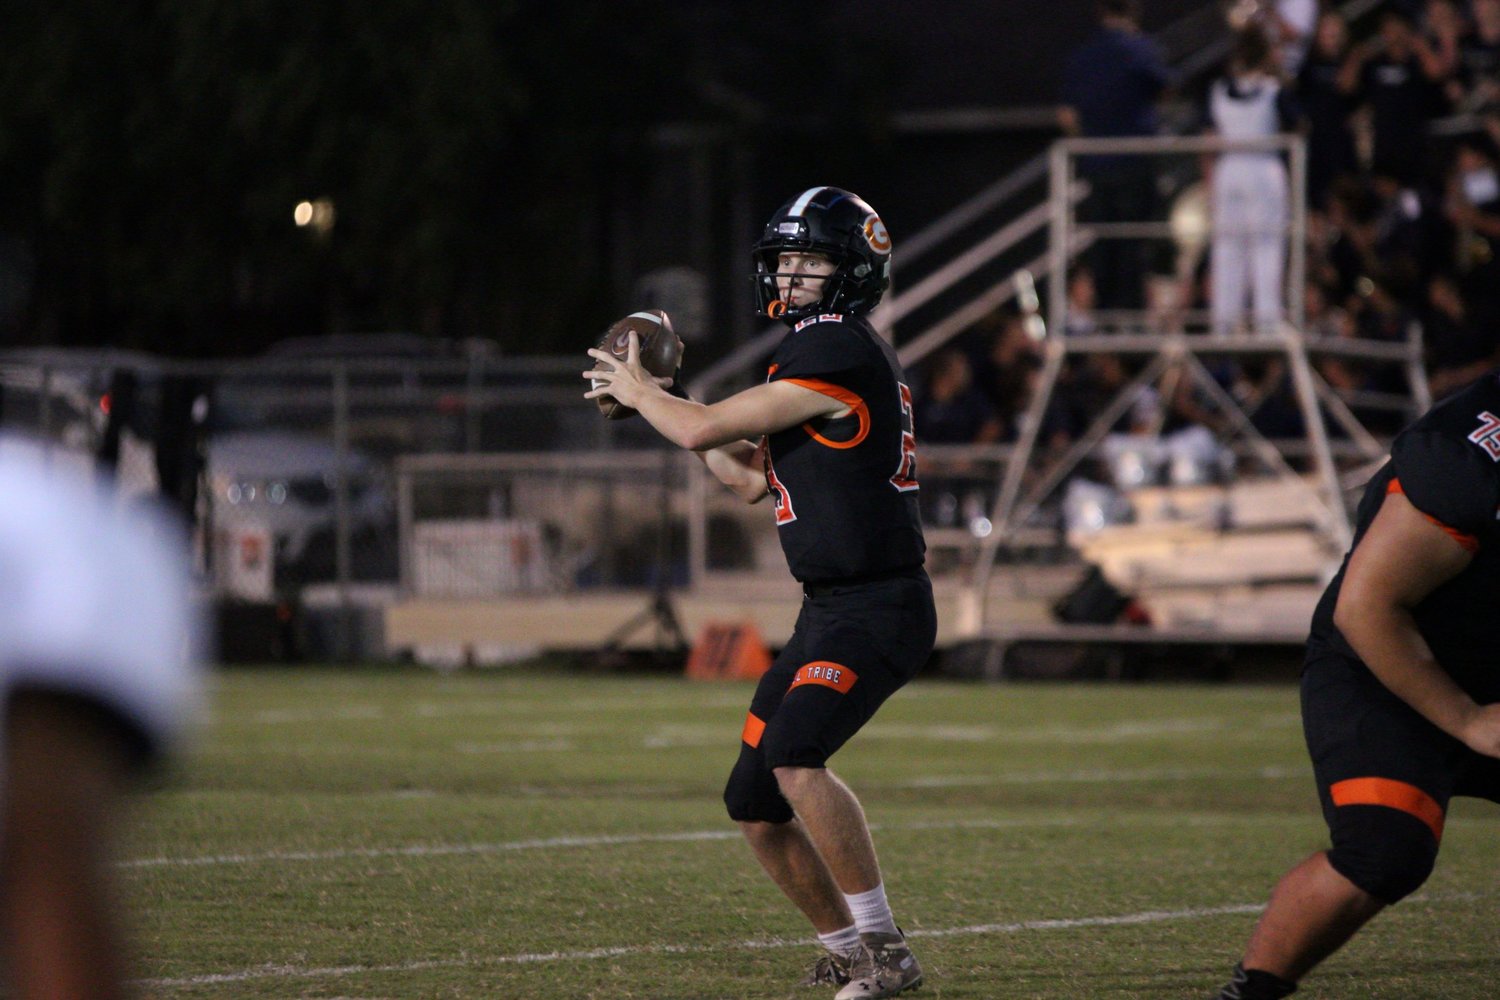 Heath Henke looks for an opening on a screen pass in Gonzales' 43-21 victory.